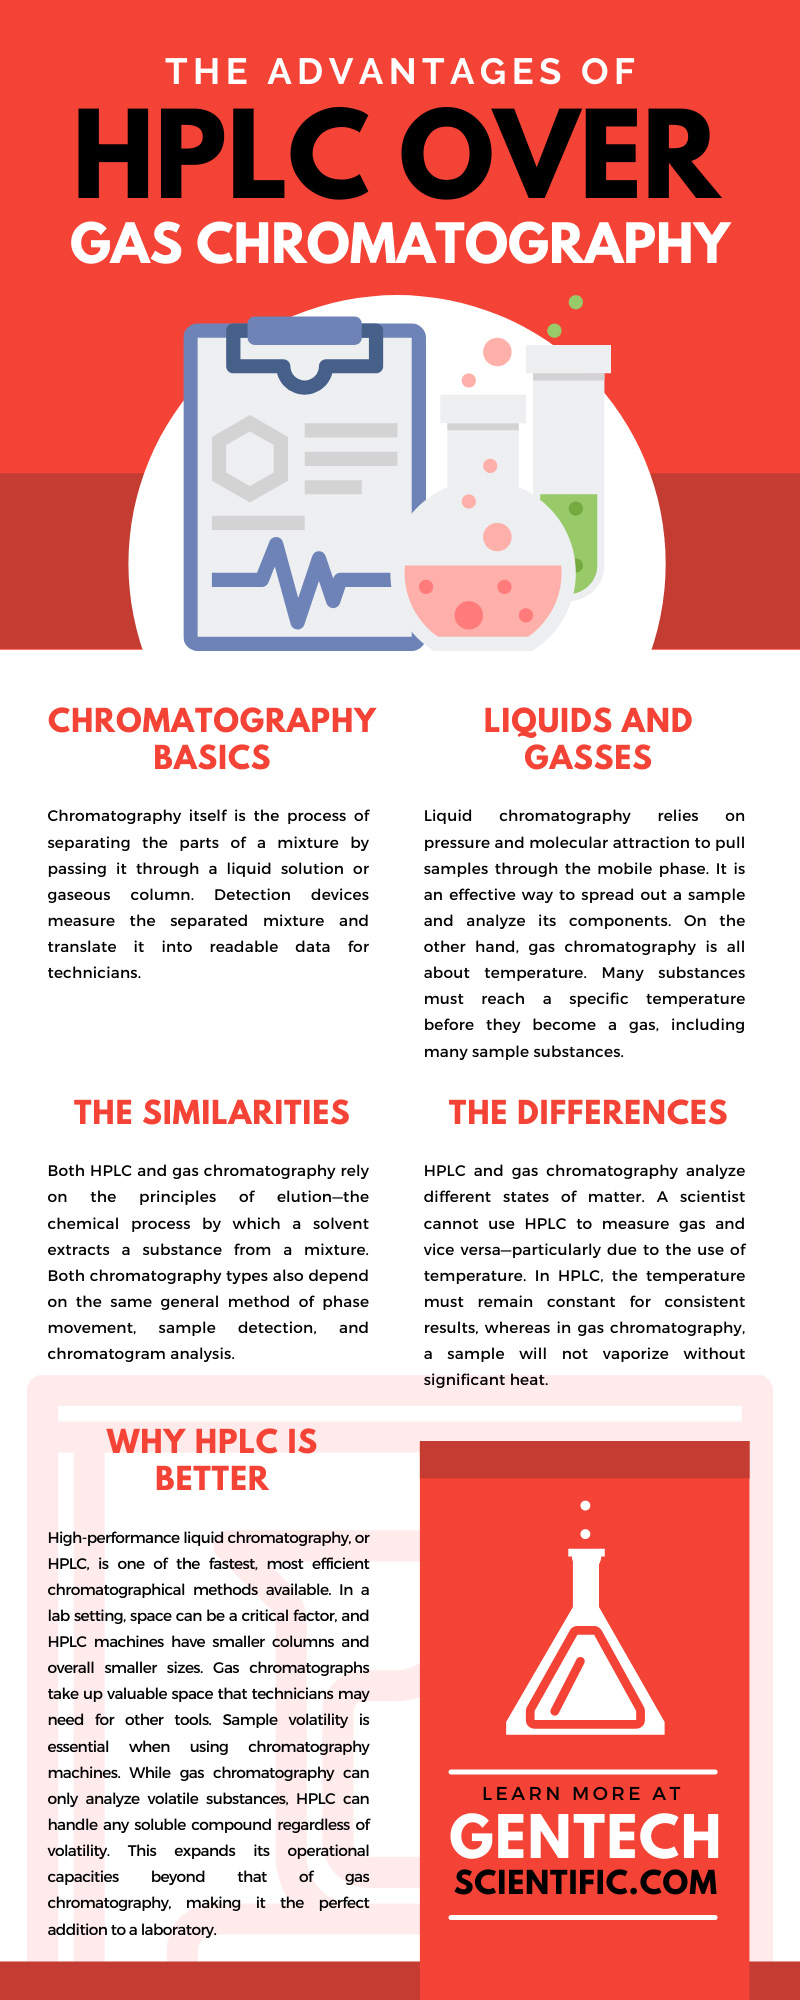 The Advantages of HPLC Over Gas Chromatography